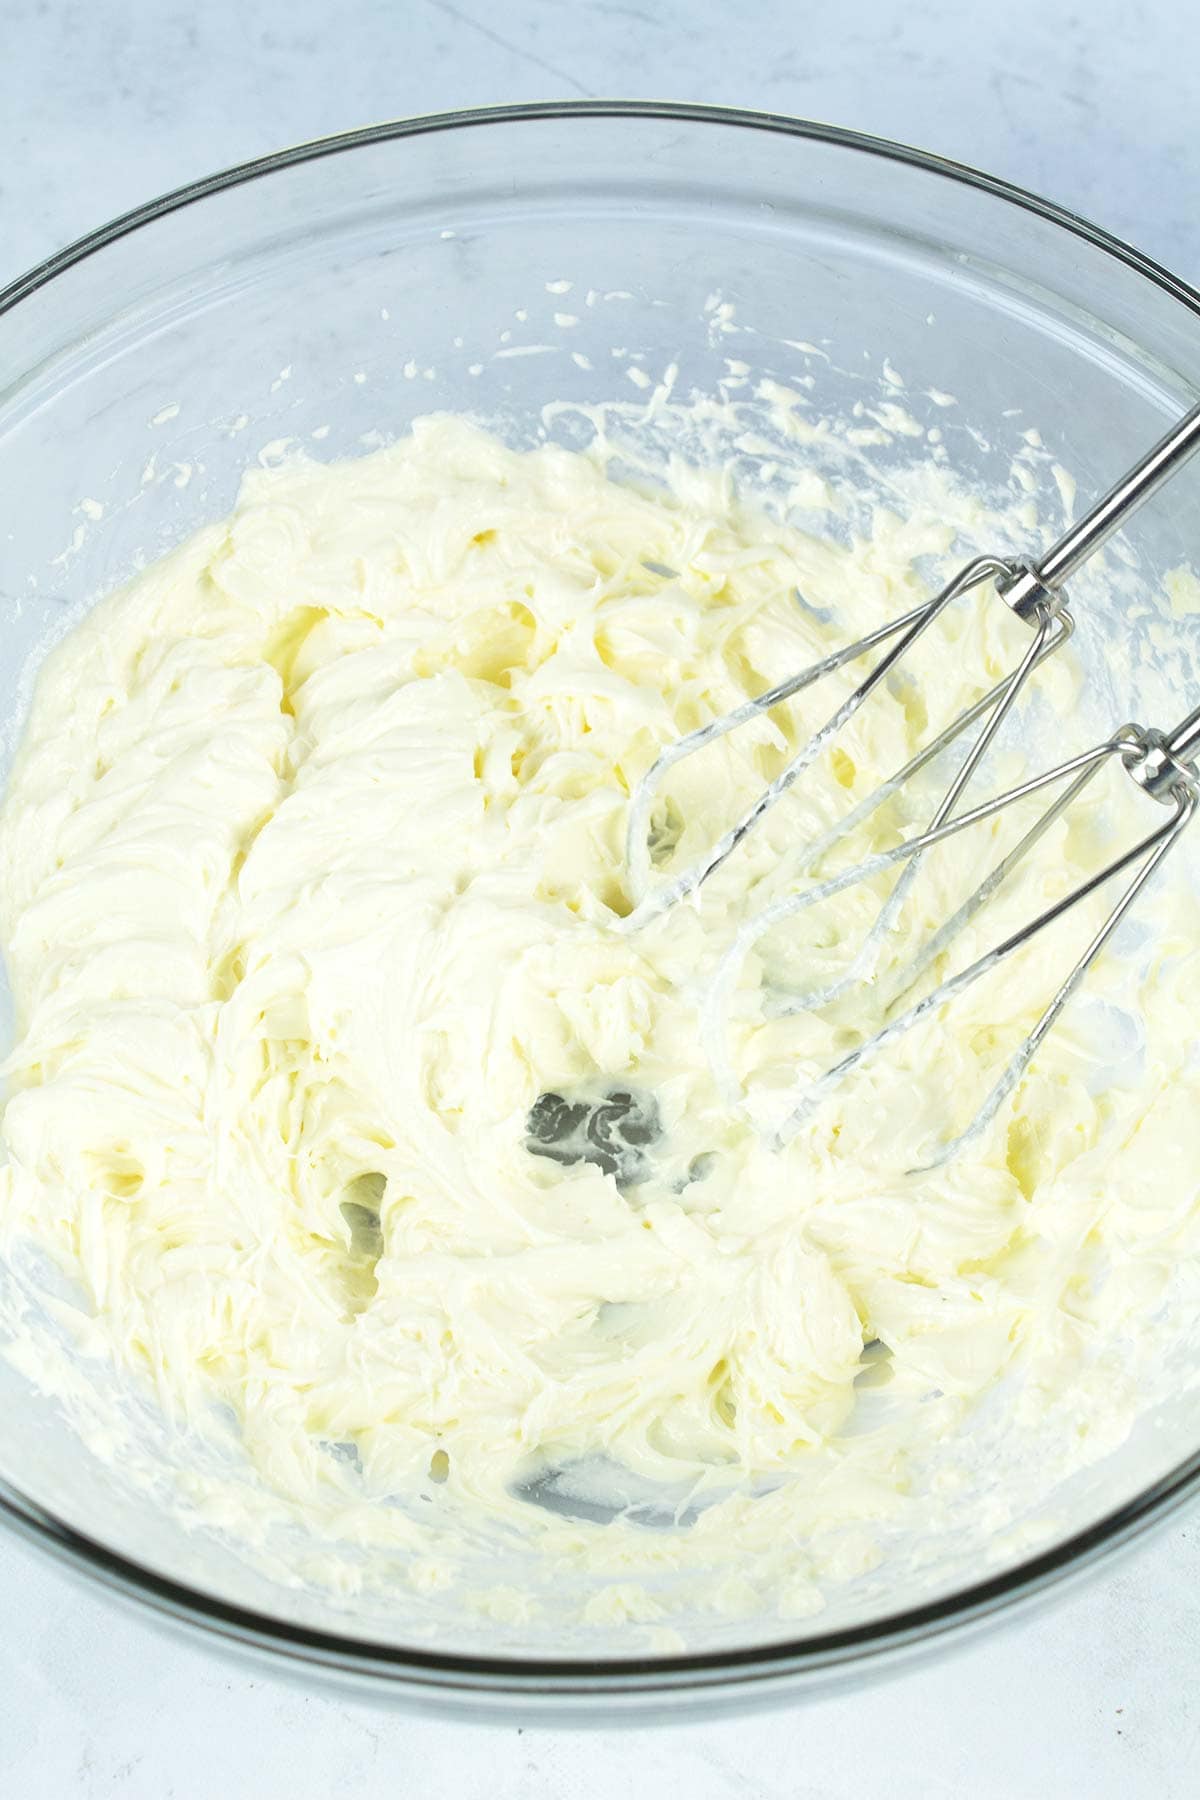 Butter and cream cheese beaten together for frosting.